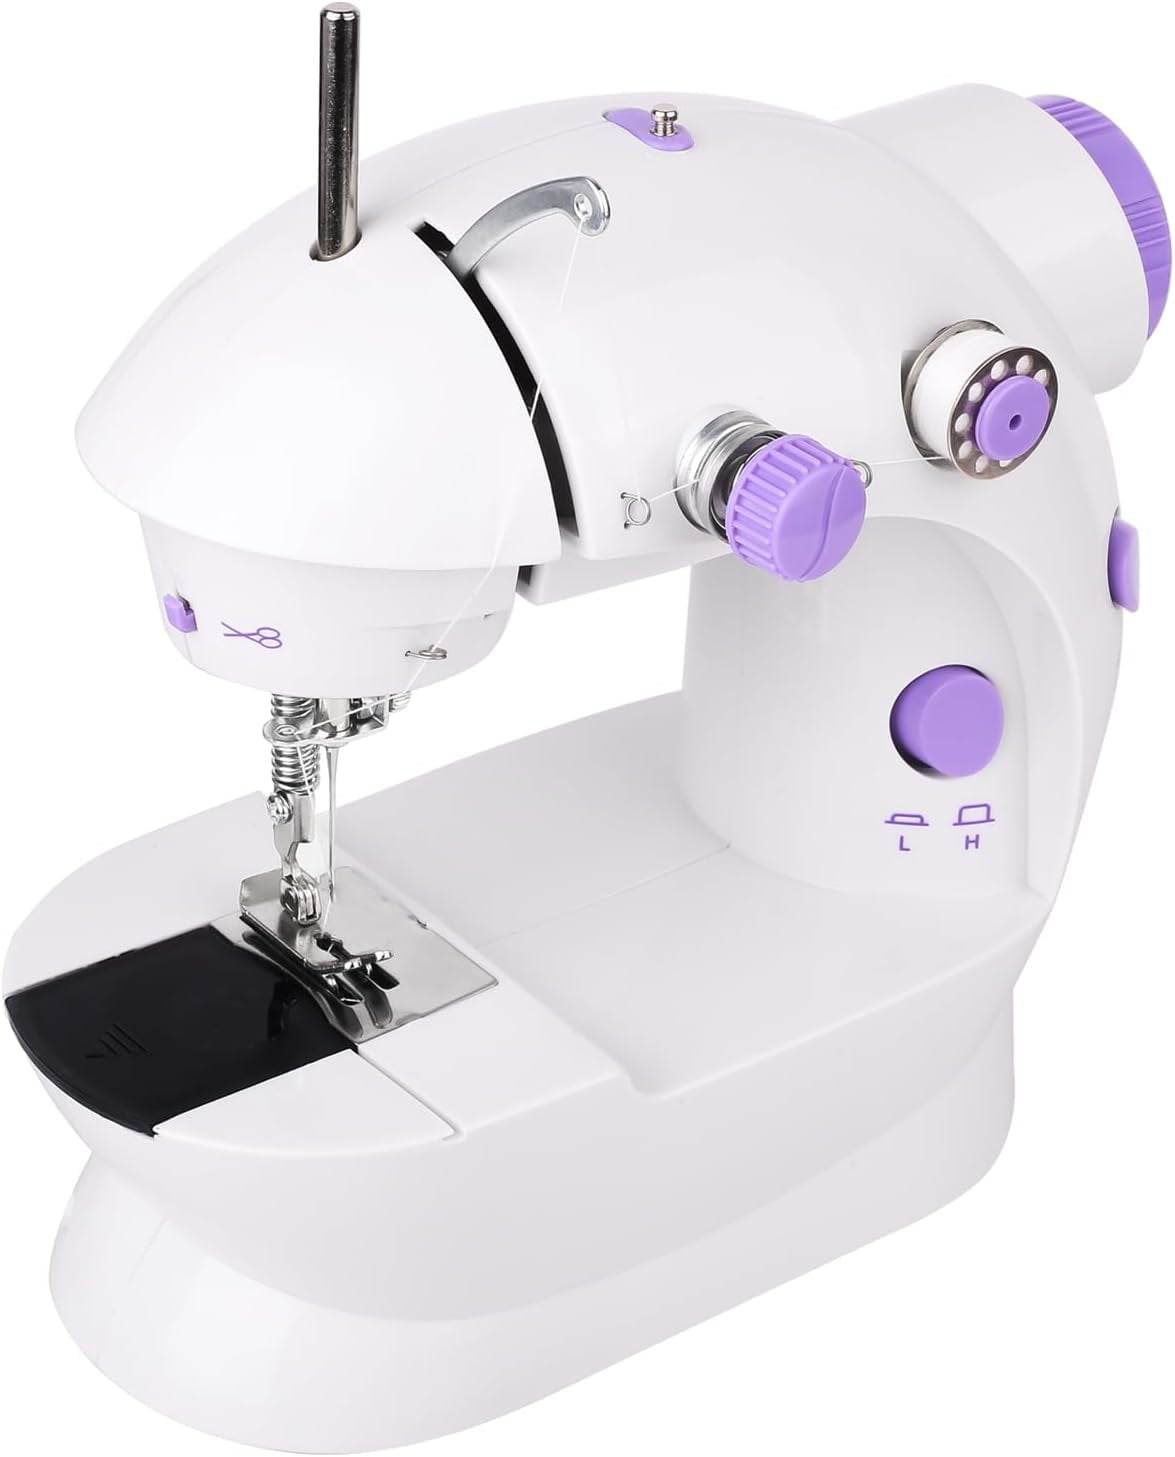 Mini Portable Sewing Machine Kit for Beginner Kids, Electric Sewing Machine  with Light,Beginners and DIY 